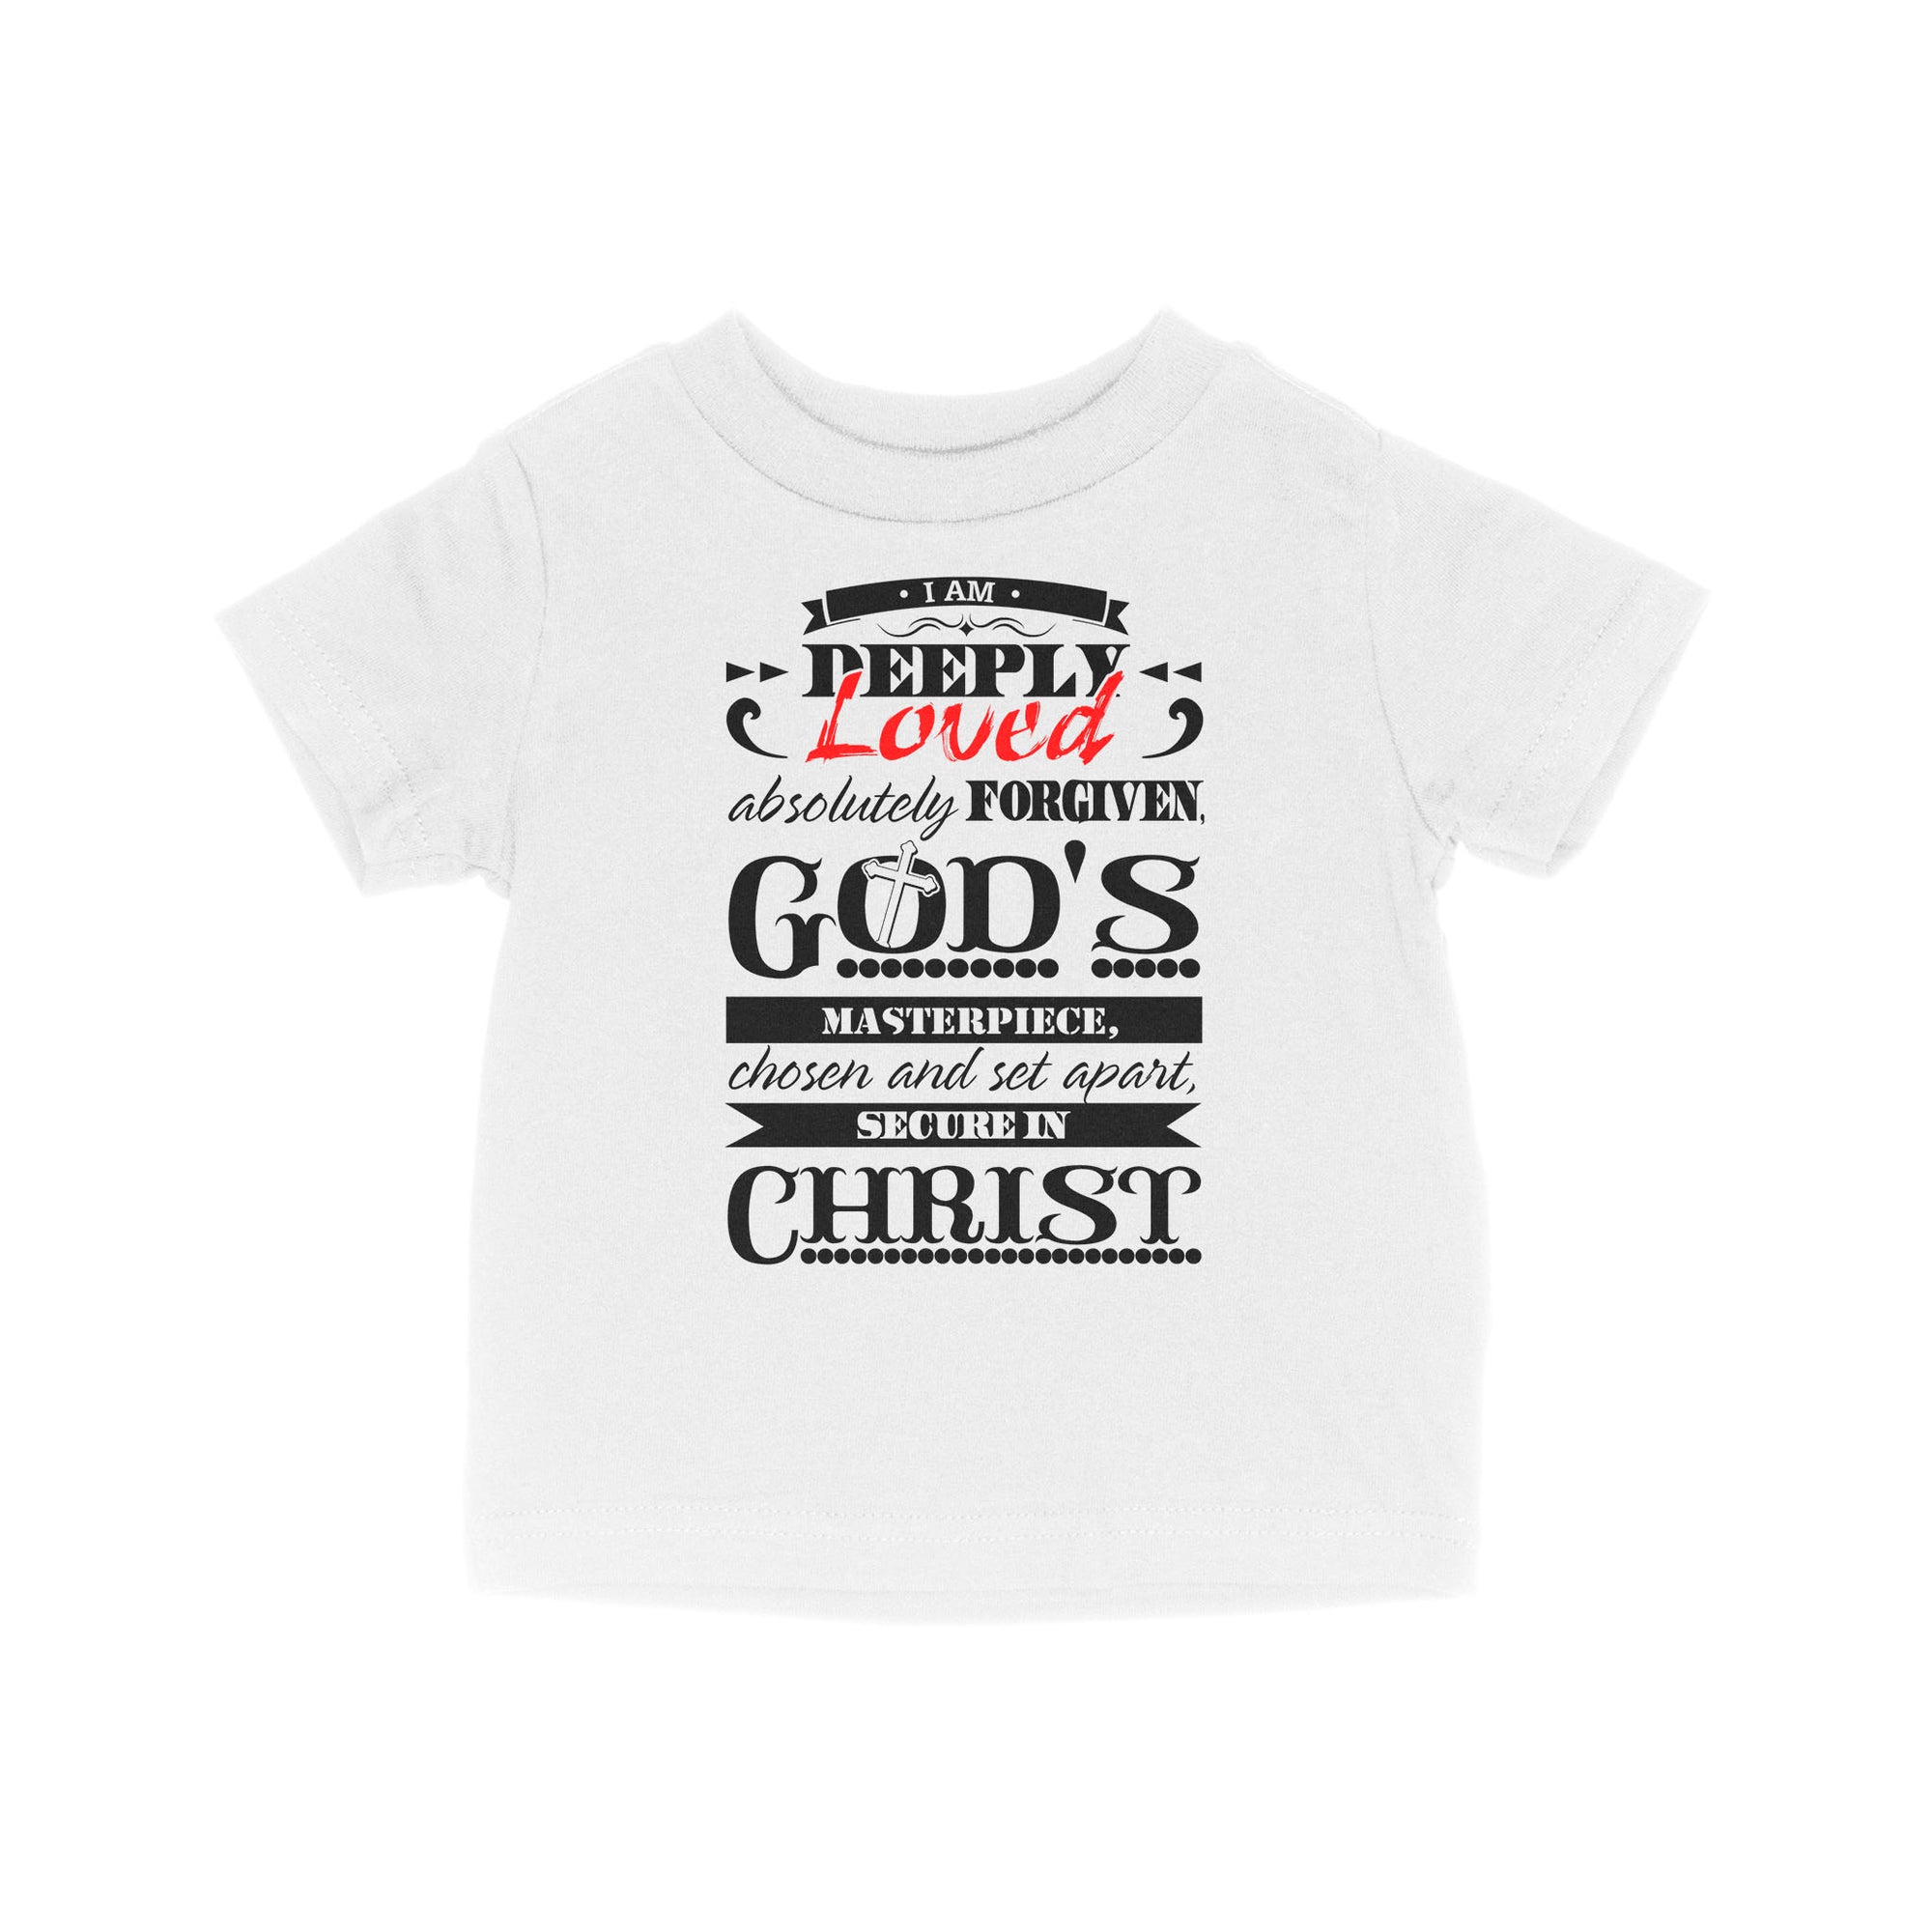 I Am Deeply Loved, Absolutely Forgiven, God's Masterpiece, Chosen and Set Apart, Secure in Christ - Baby T-Shirt